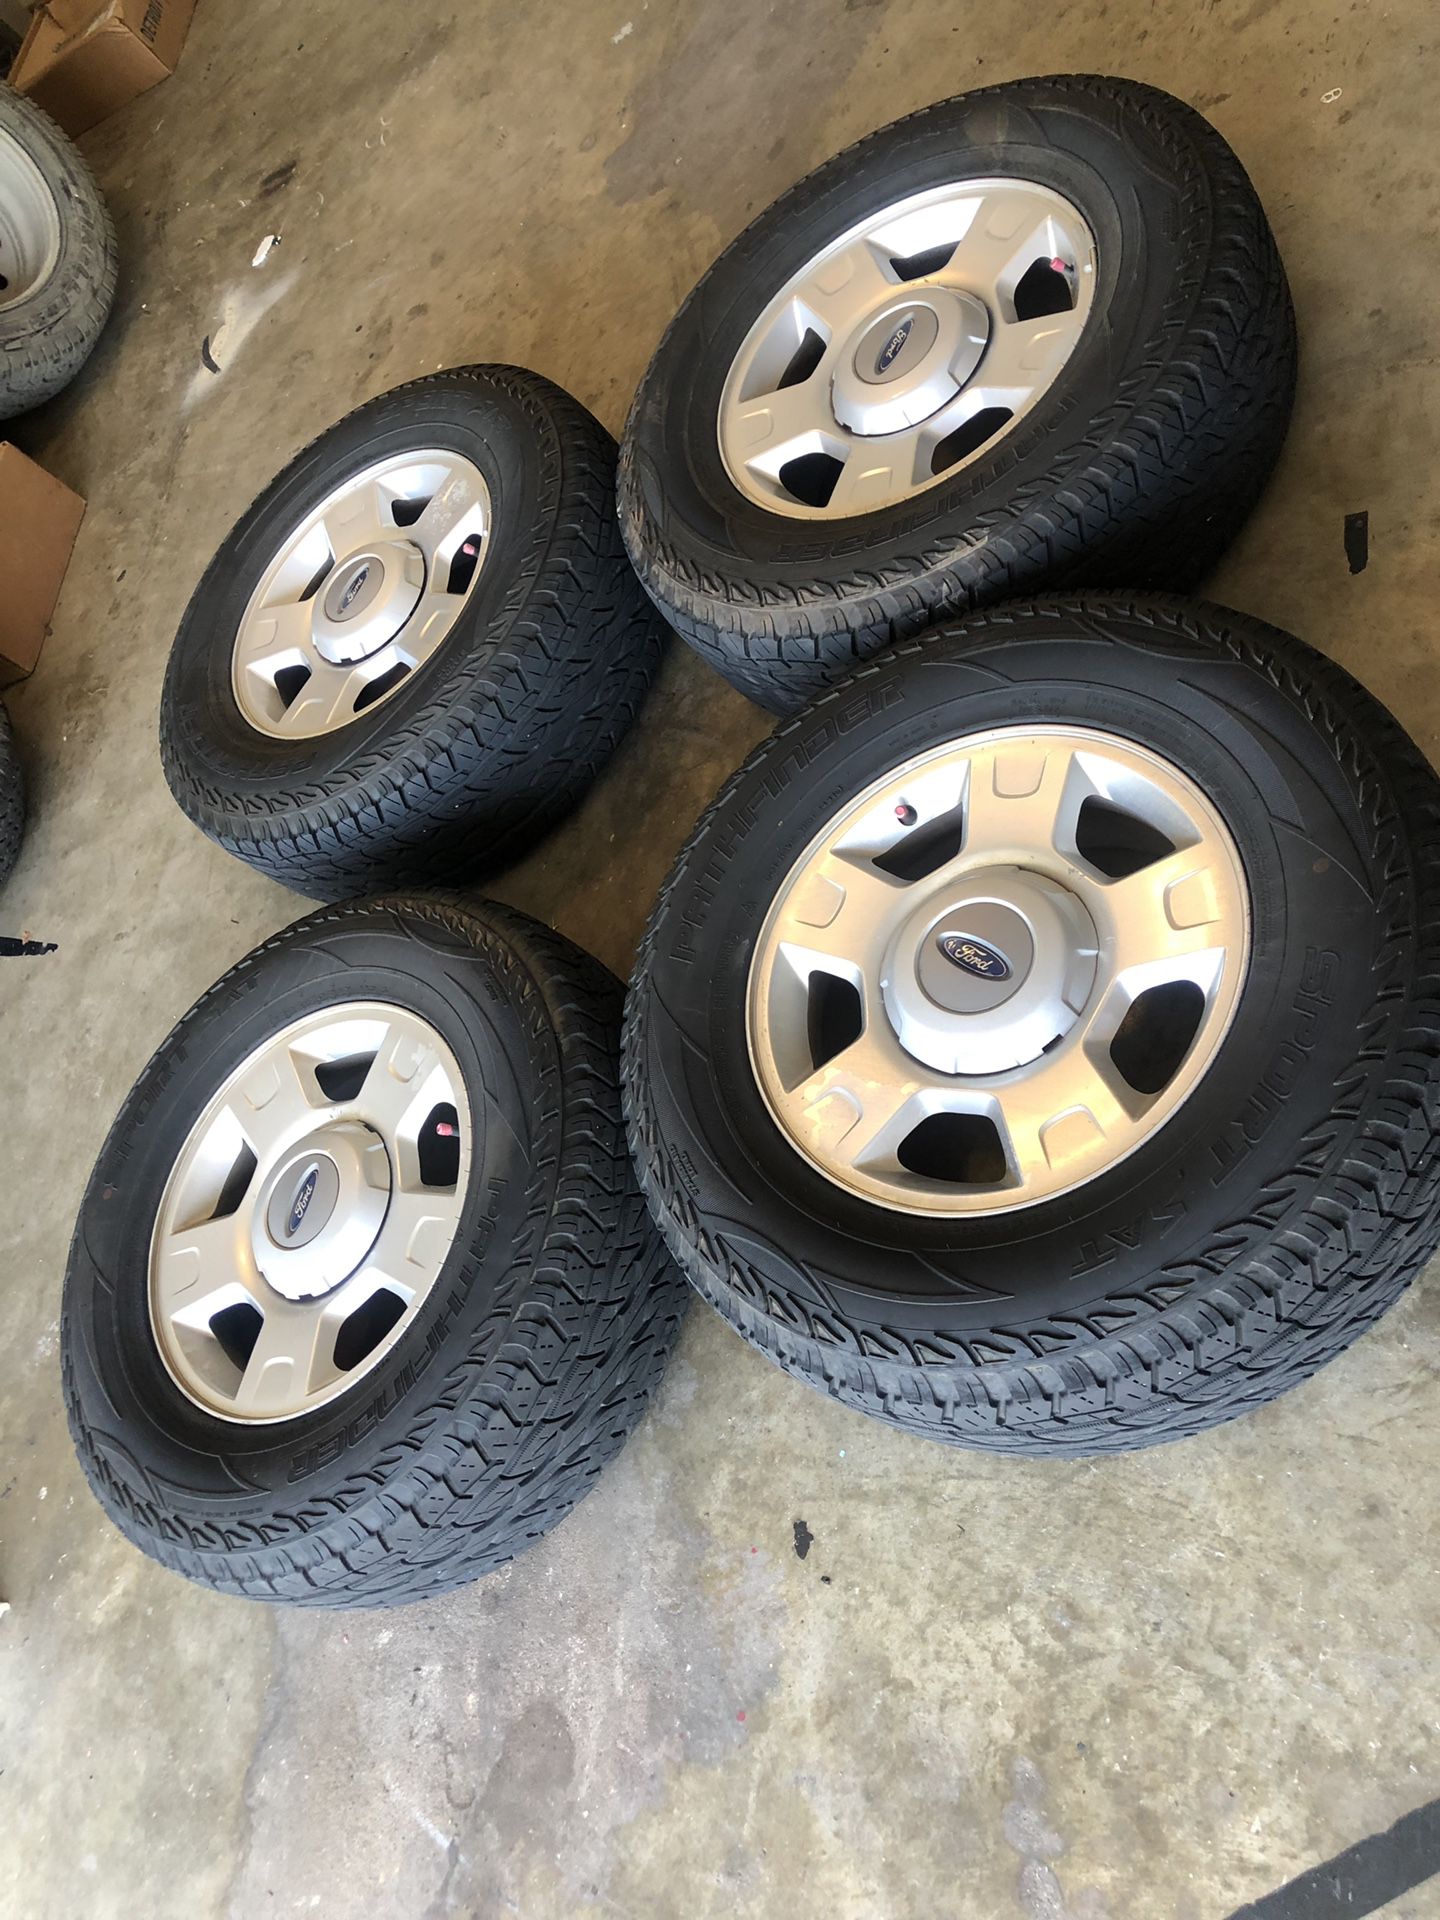 Ford F-150 6 lug 17” wheels and tires. 80%. Tires